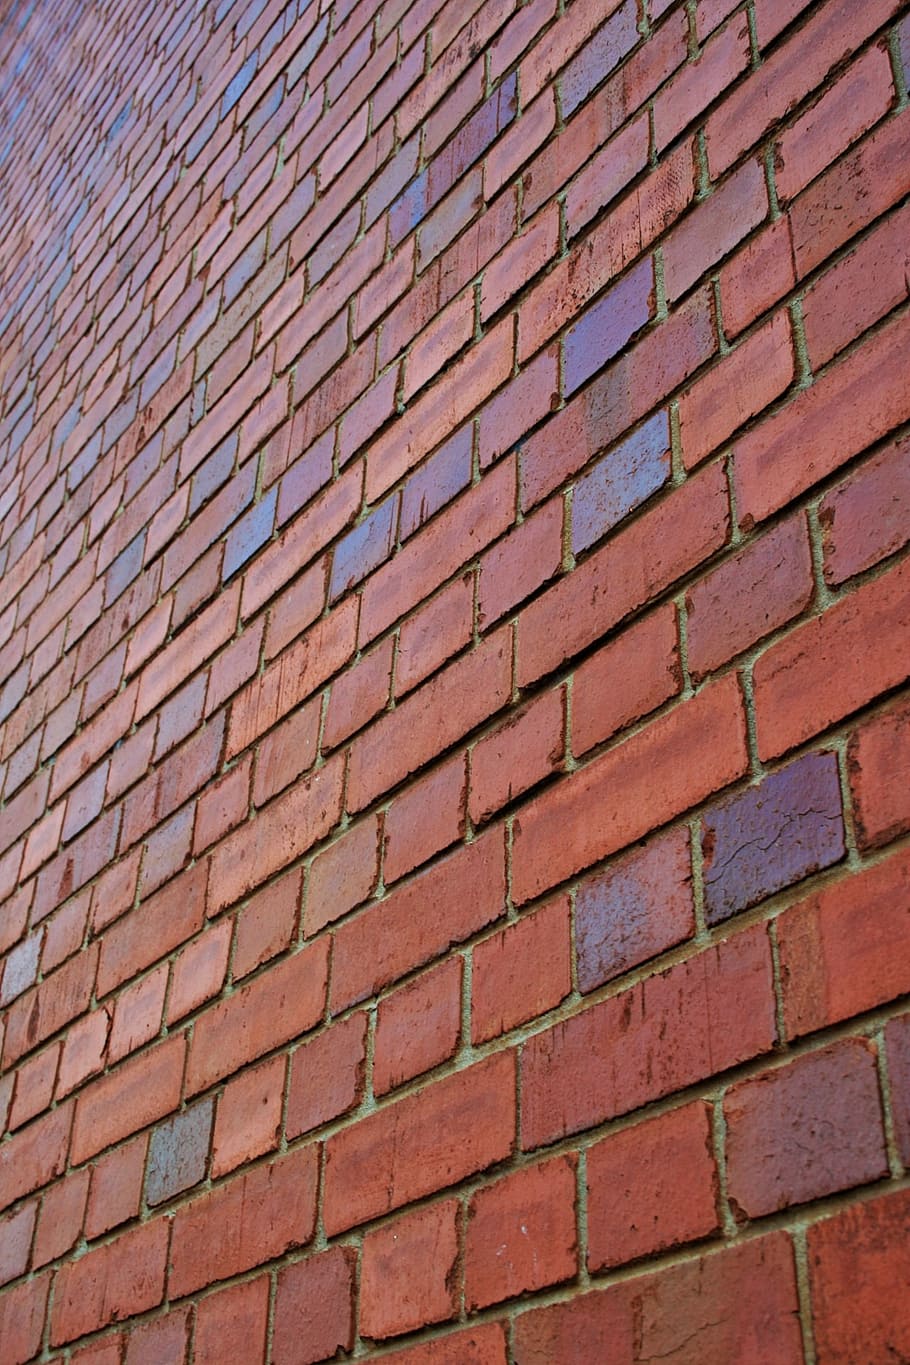 bricks, red, rows, repetition, wall, brick, block, brickwork, construction, architecture